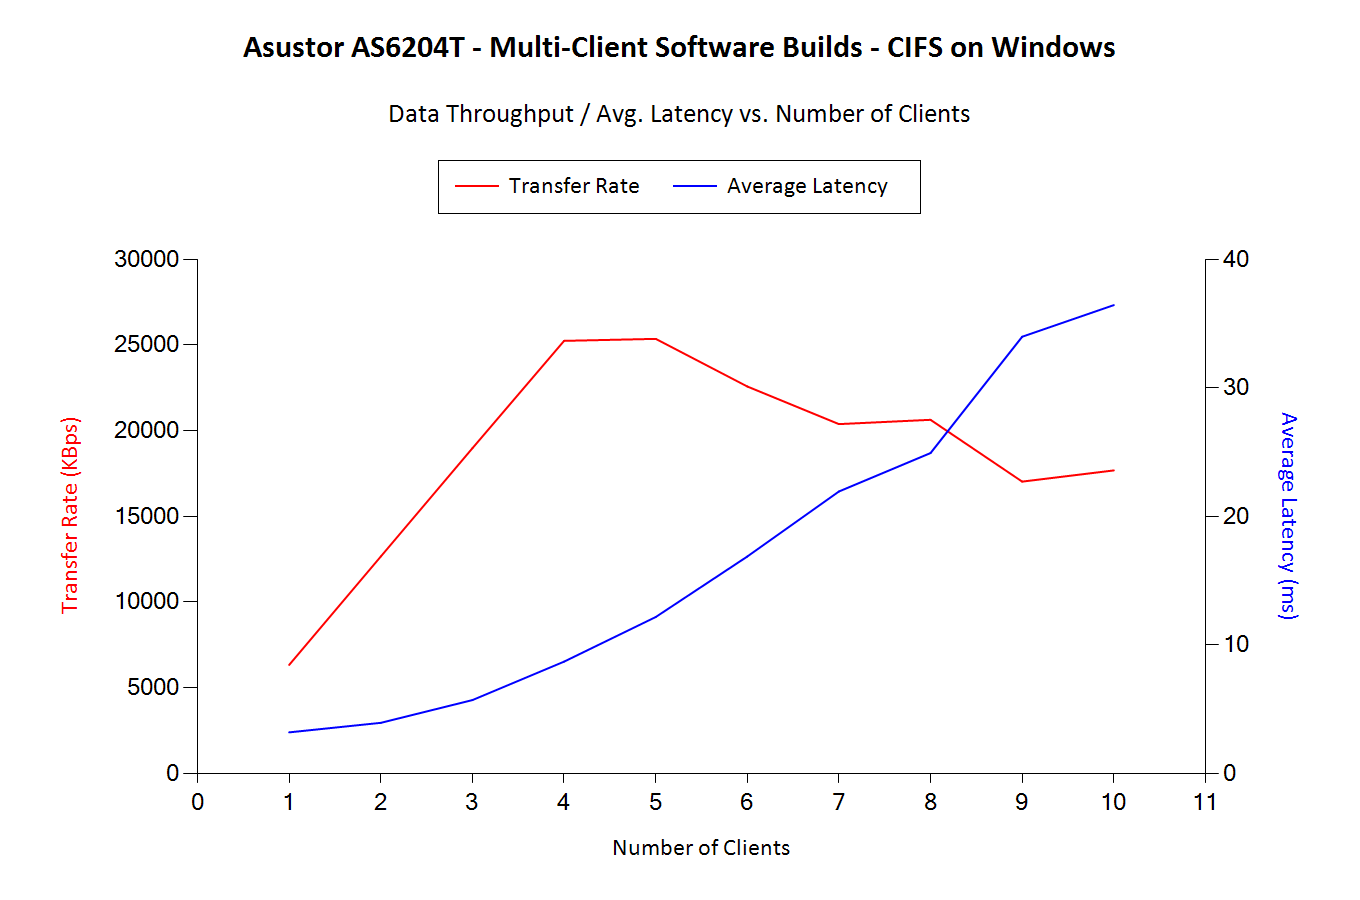 Software Builds - Bandwidth and Latencies